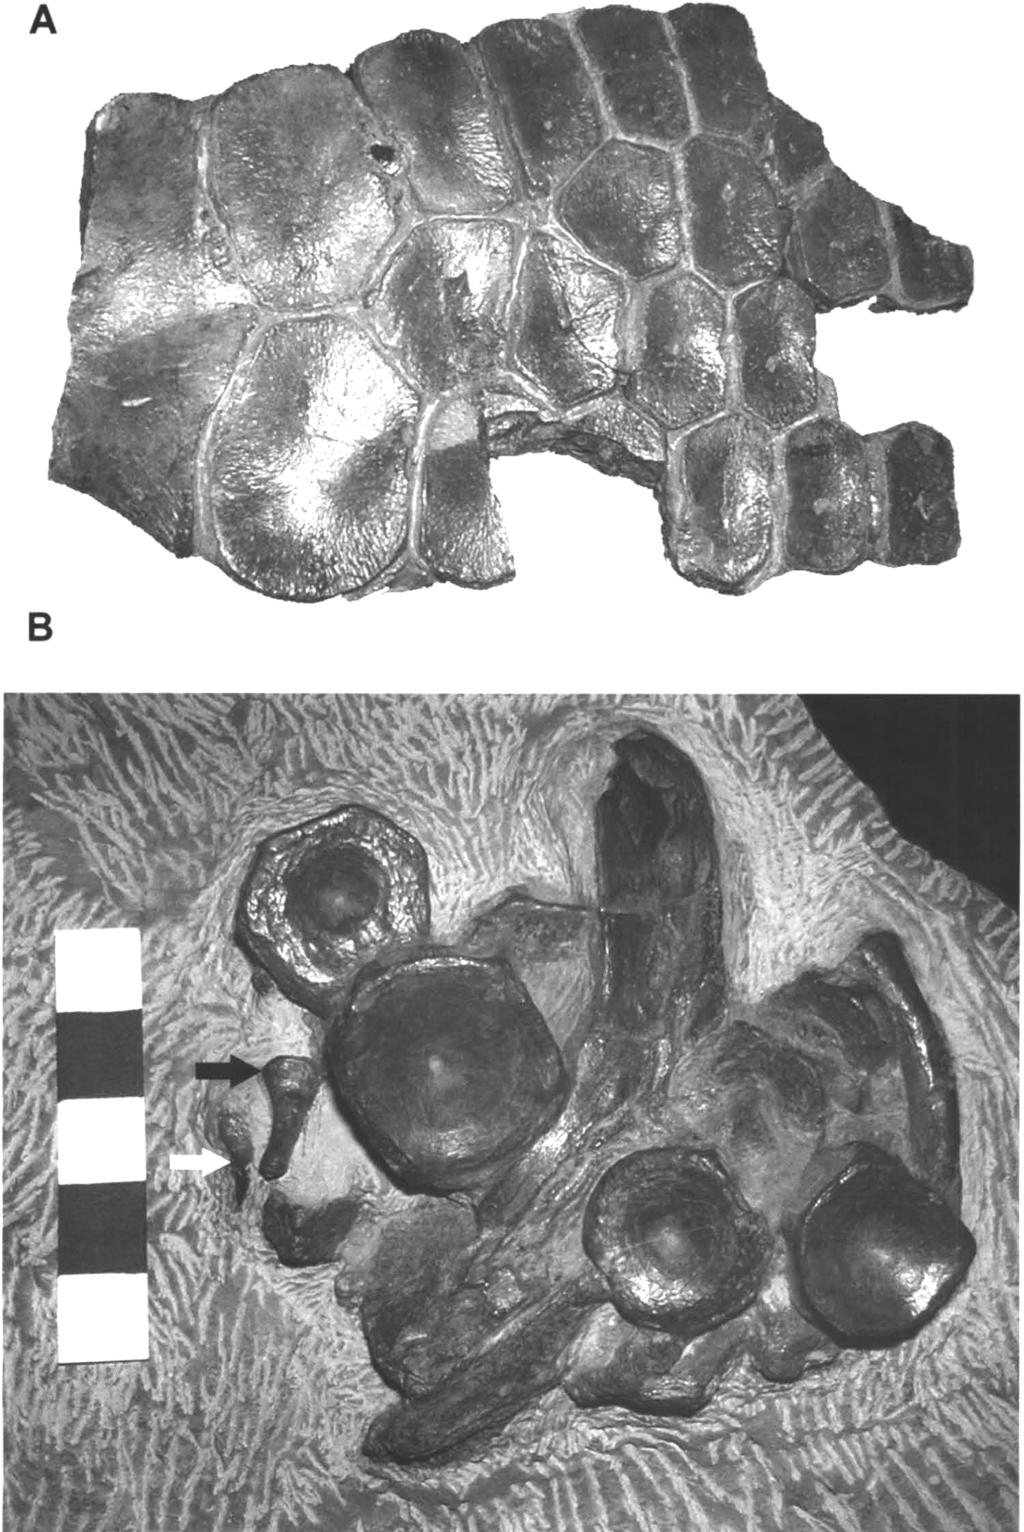 A MARINE REPTILE FAUNA FROM THE EARLY JURASSIC SALTFORD SHALE OF CENTRAL ENGLAND 257 Fig.